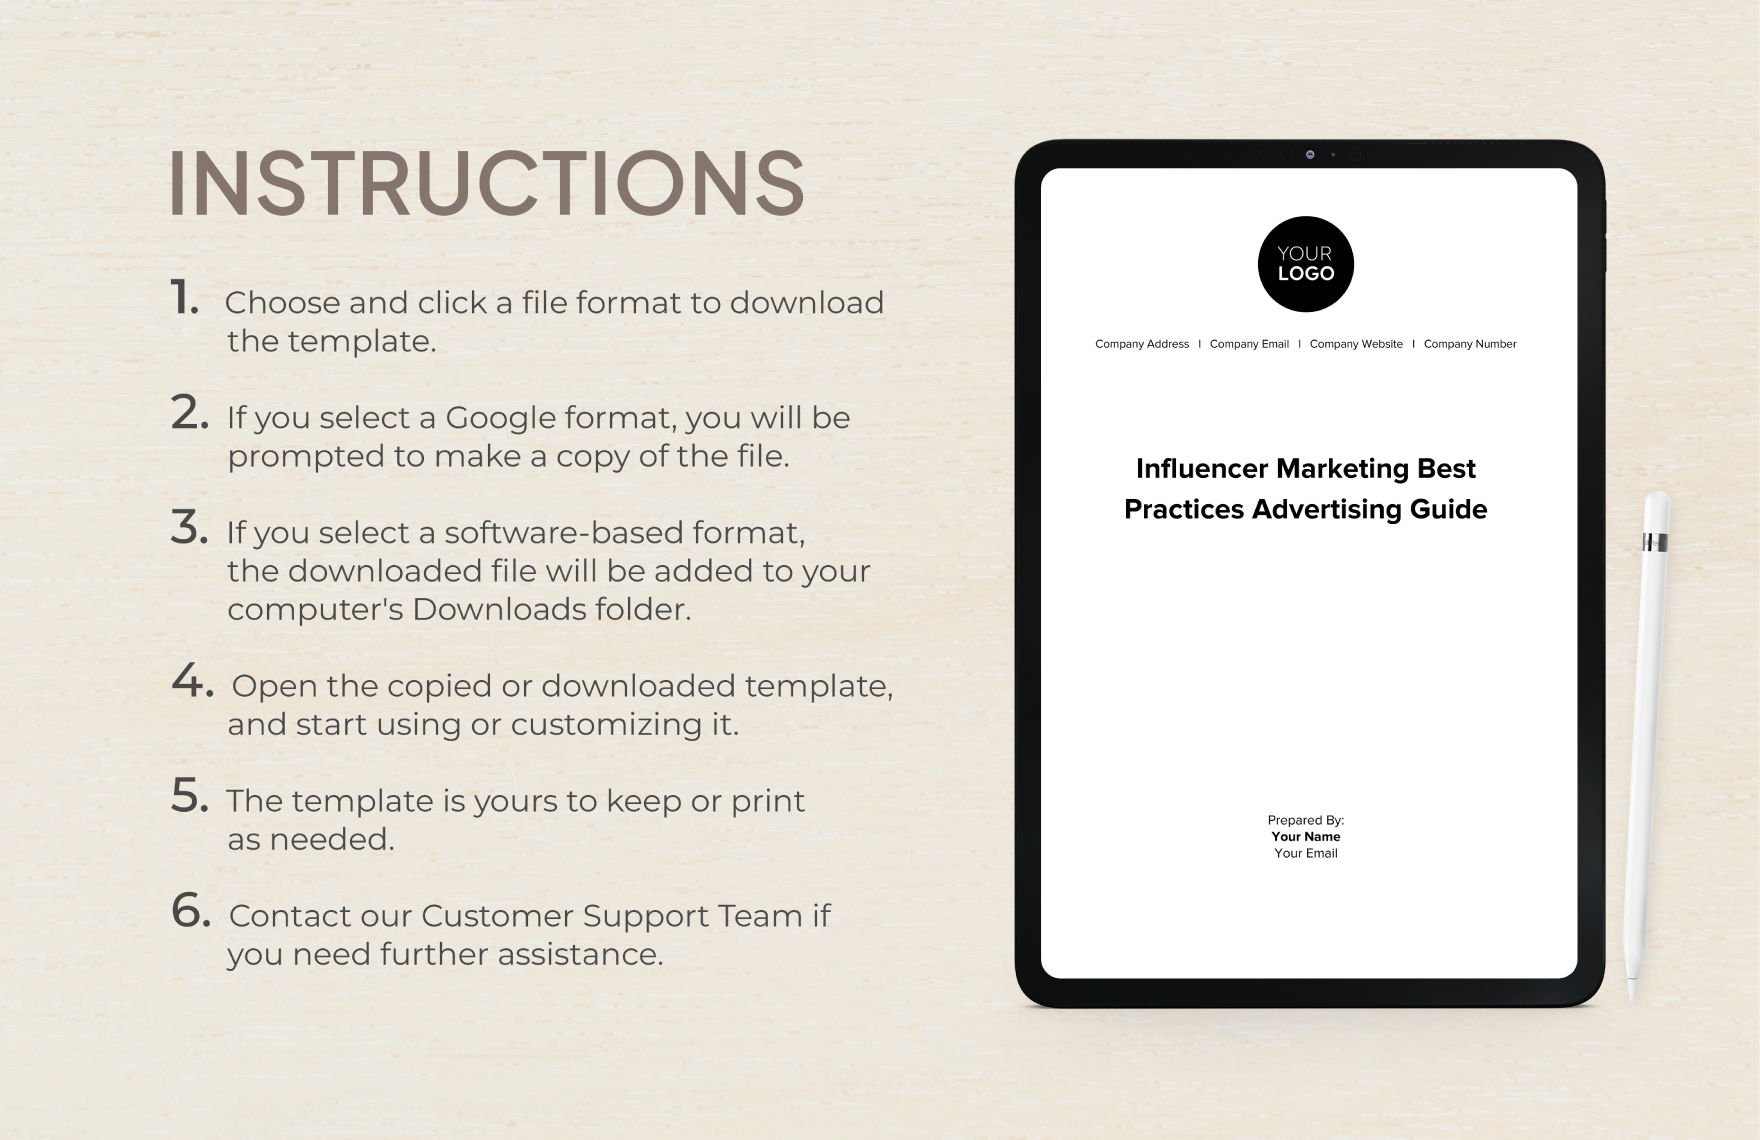 Influencer Marketing Best Practices Advertising Guide Template